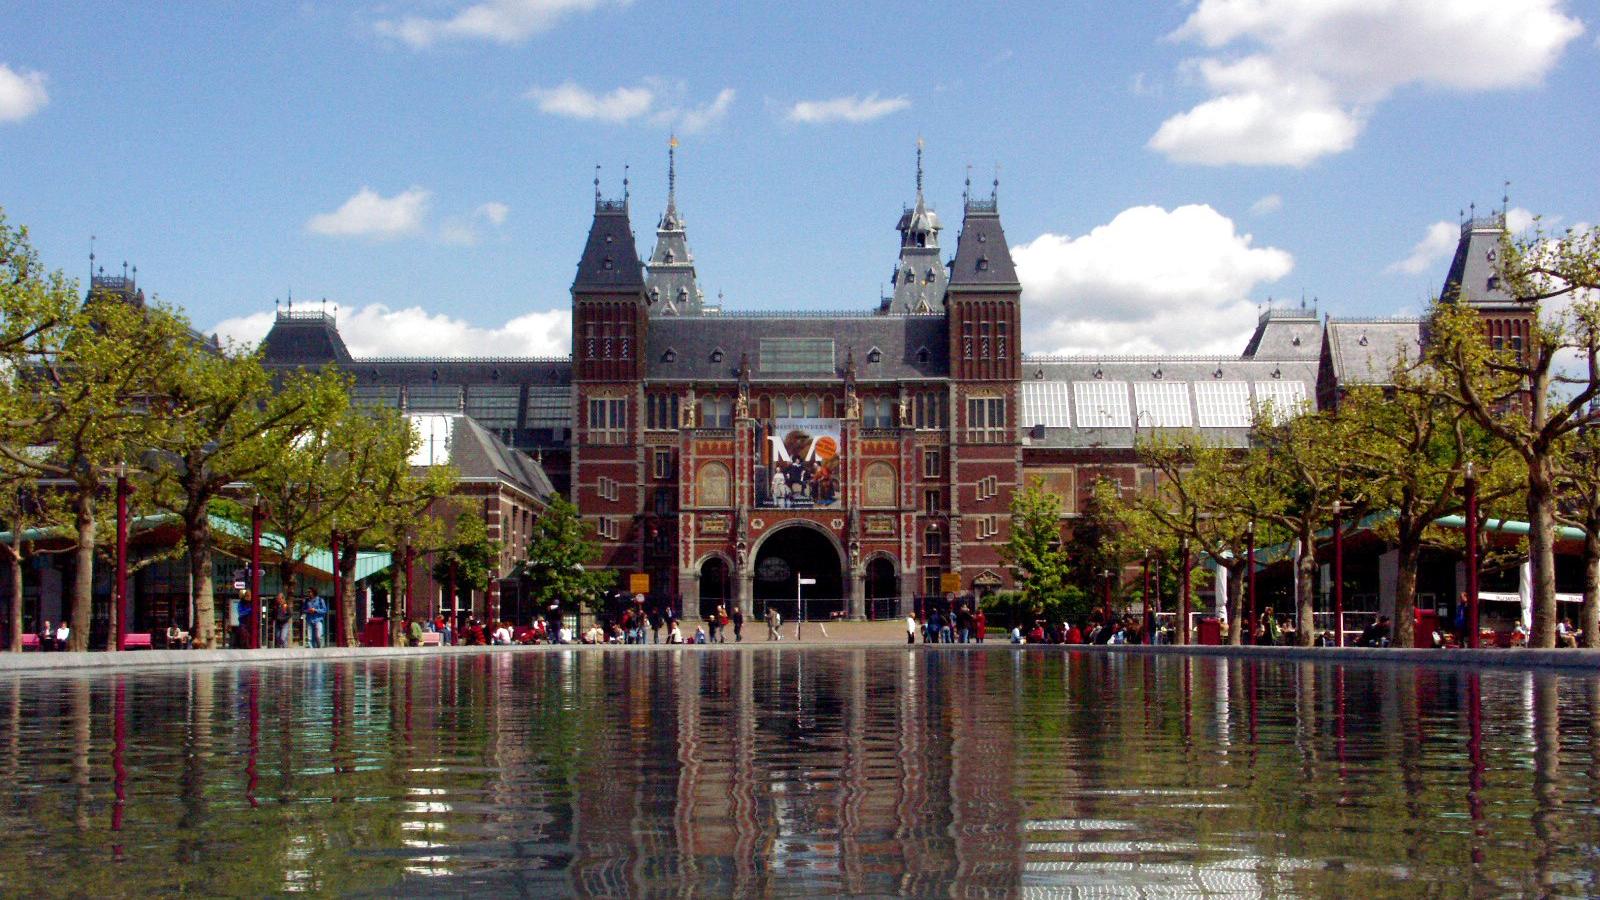 The hotel is surrounded by many tourist attractions such as Van Gogh Museum, Rijks Museum, and a flower market